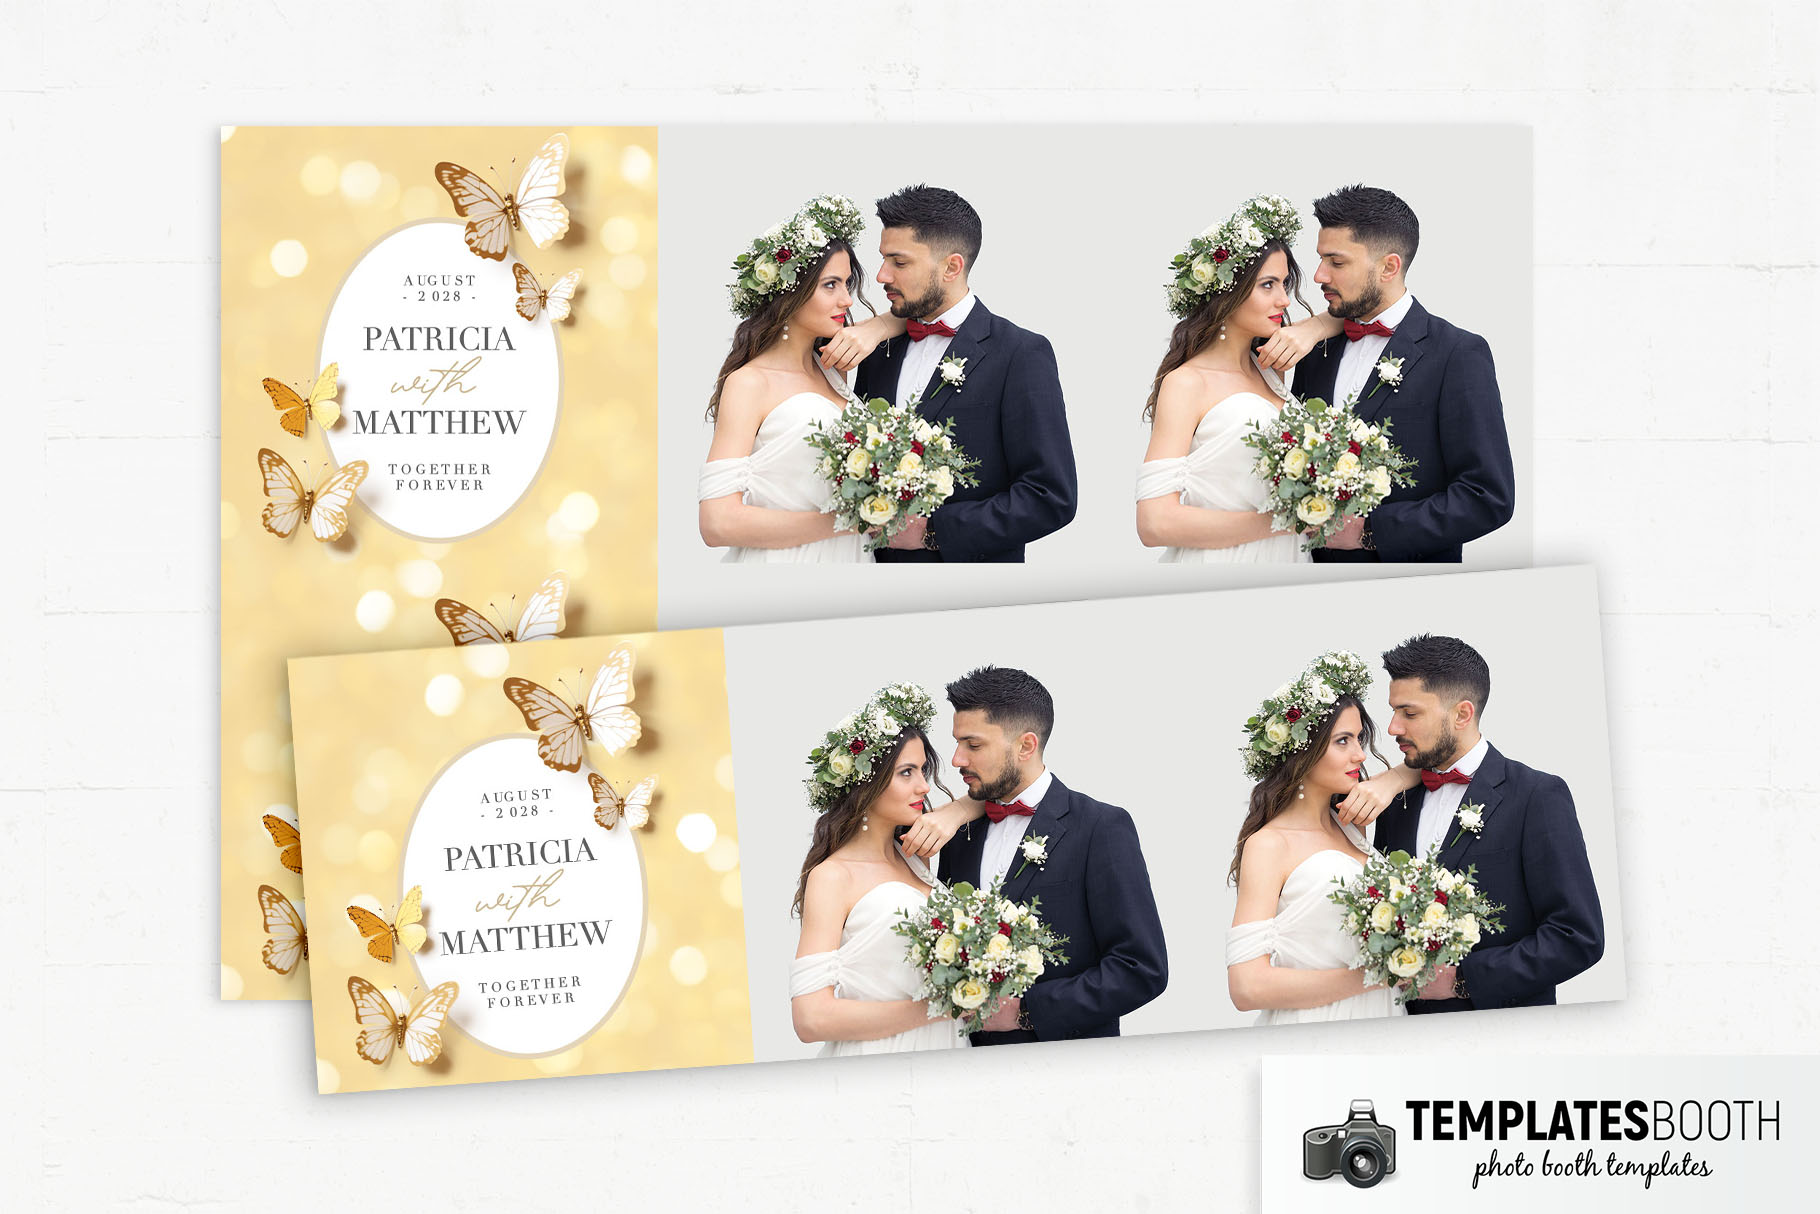 Yellow Butterflies Photo Booth Template